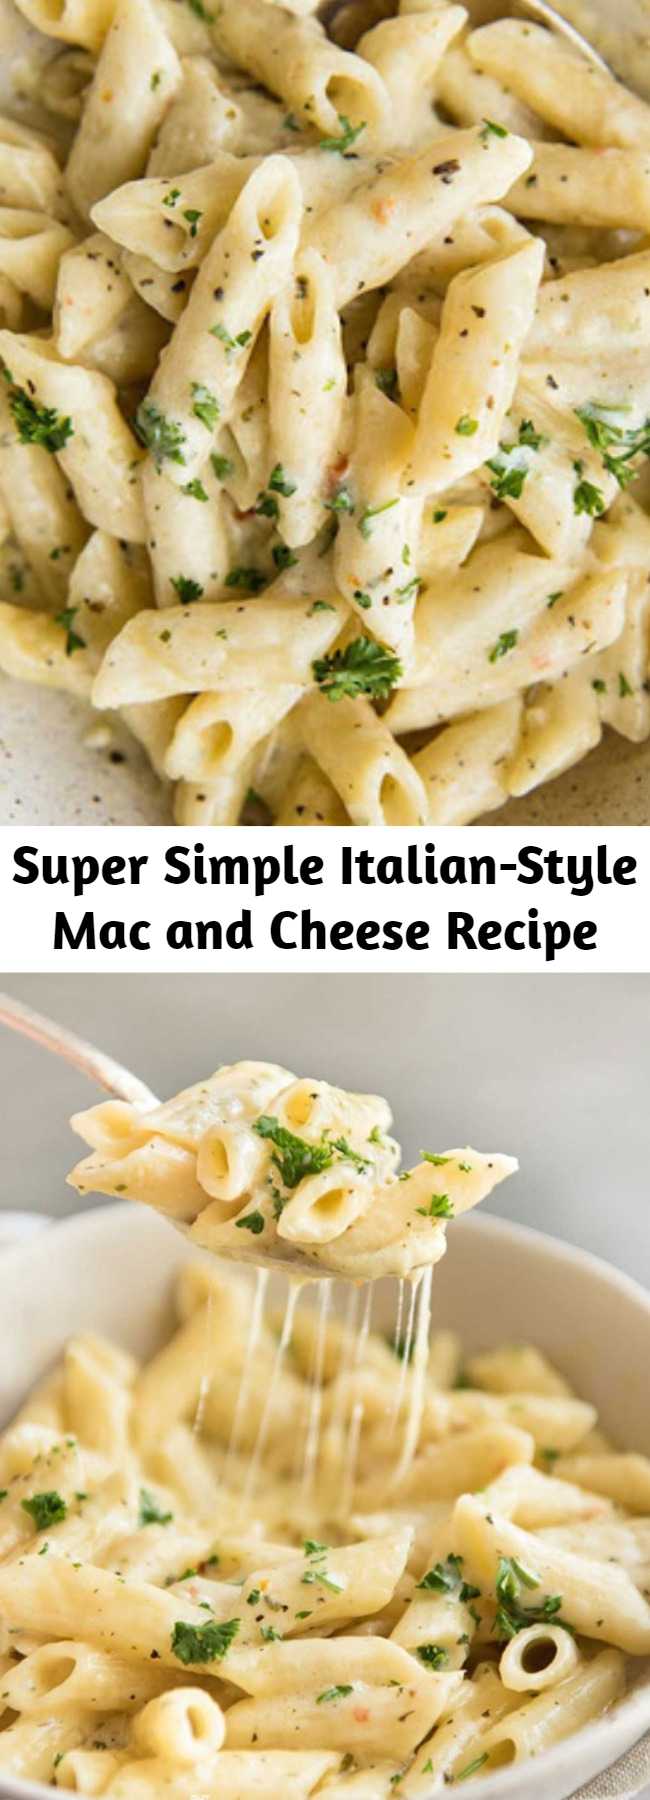 Super Simple Italian-Style Mac and Cheese Recipe - Super Simple Mac & Cheese Italian Style is a go to recipe around here. With just 7 ingredients and 15 minutes you can have this fantastic dinner on the table. It is the ultimate left-over and weeknight dinner helper. #MacAndCheese #SimpleDinner